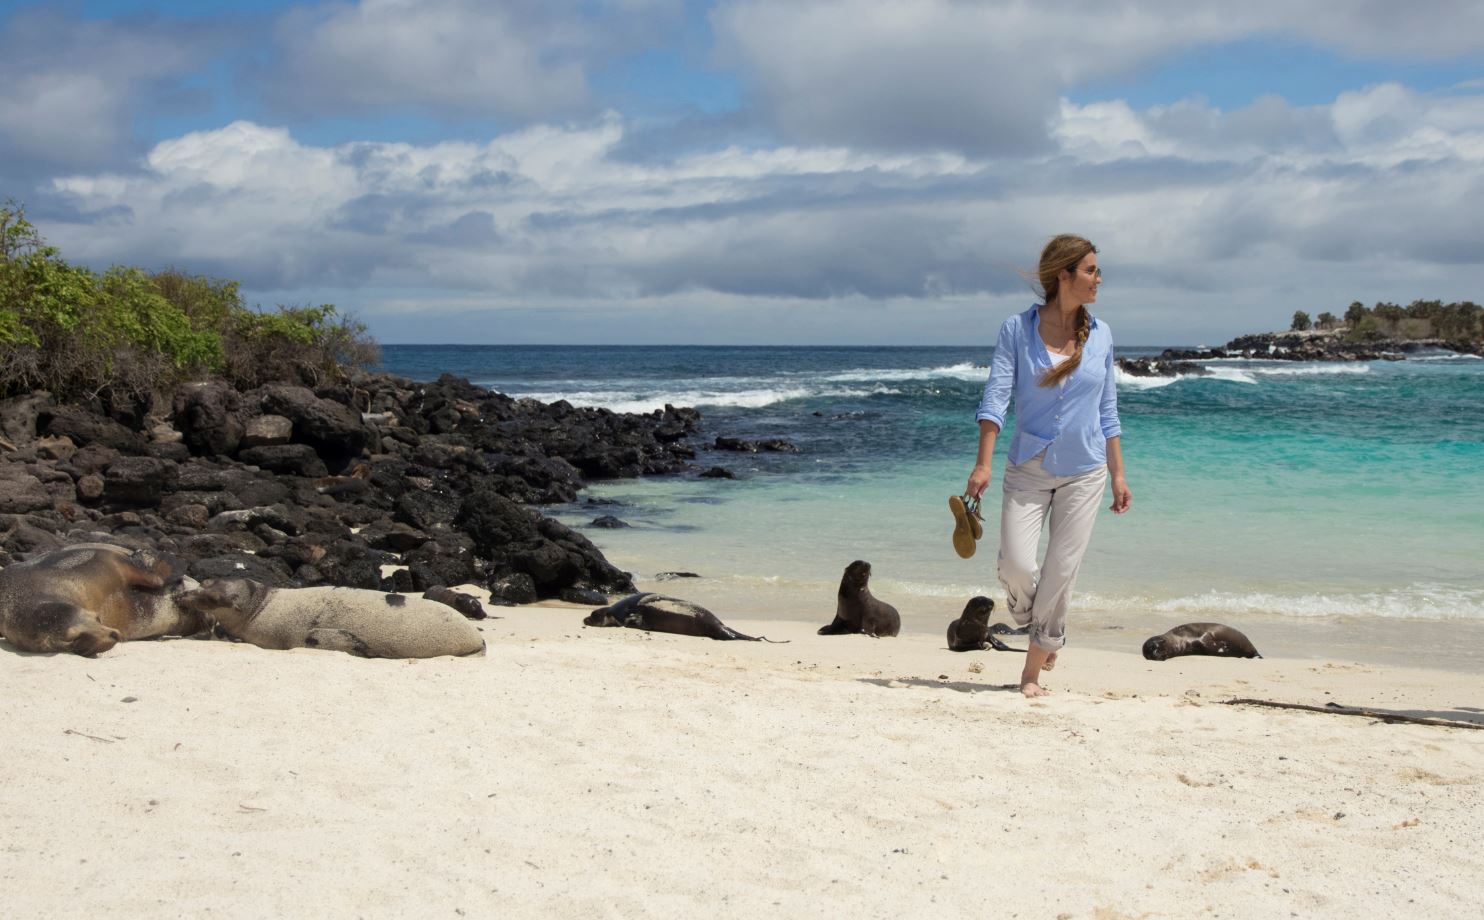 Woman On A Beach In The Galapagos Islands